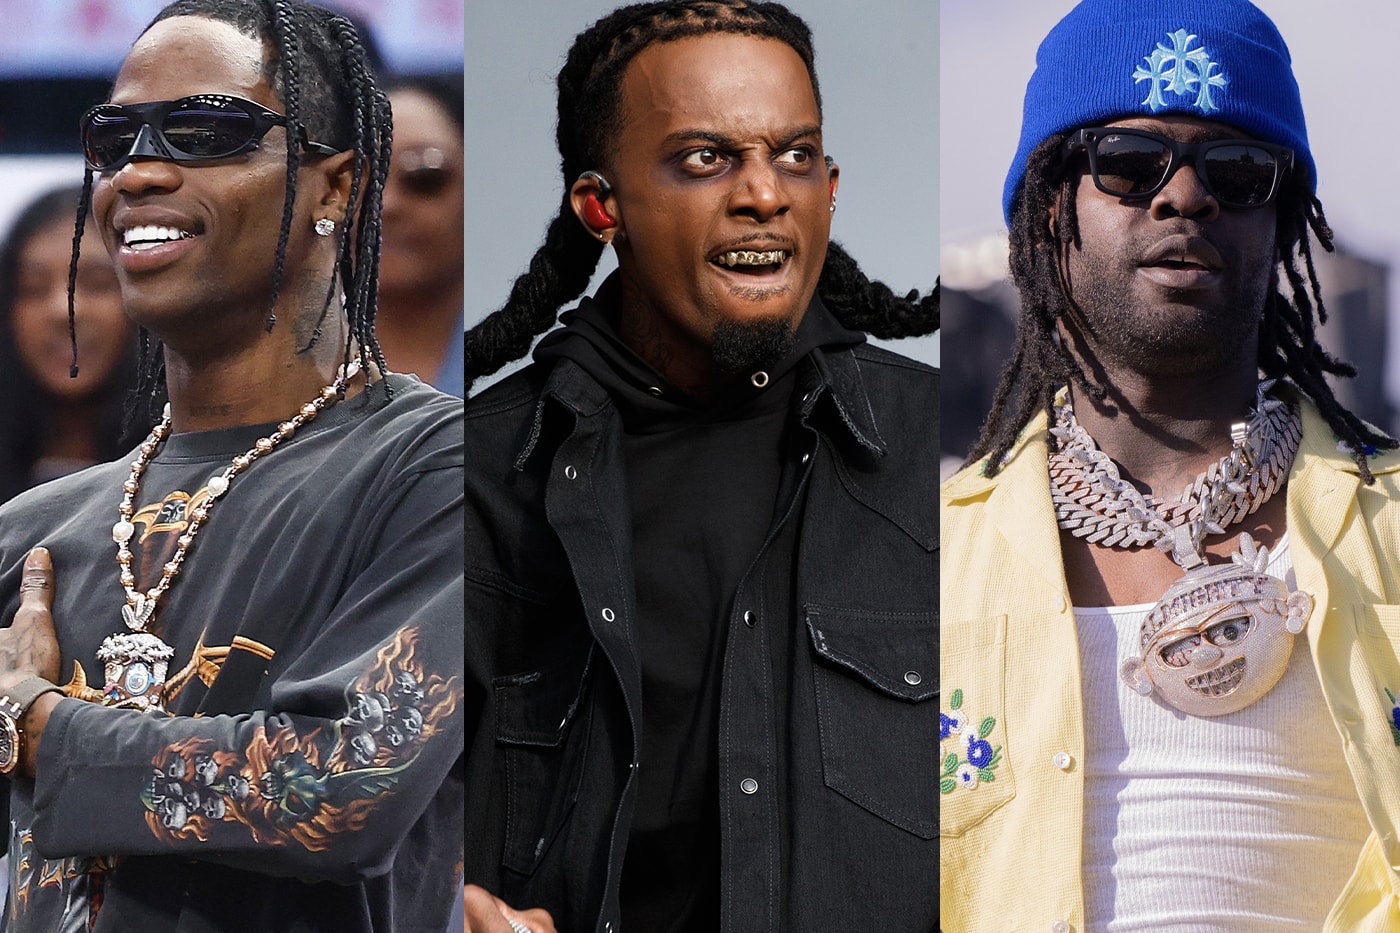 Cactus Jack, Playboi Carti and Chief Keef Lead Summer Smash 2024 Lineup The rest of the roster is stacked. Don Toliver, Sheck Wes, SoFaygo and Chase B Other Friday performers include Big Sean, Destroy Lonely, Flo Milli and Famous Dex.  Saturday sees Kodak Black, Lil Tecca, Cash Cobain, Ski Mask the Slump God and Paris, Texas. Leading up to Sosa's anticipated Sunday homecoming will be Denzel Curry, JID, Ken Carson and Lil Yachty. tickets presale price chicago first collective lucki anycia hardrock illinois first time stage rap concert 